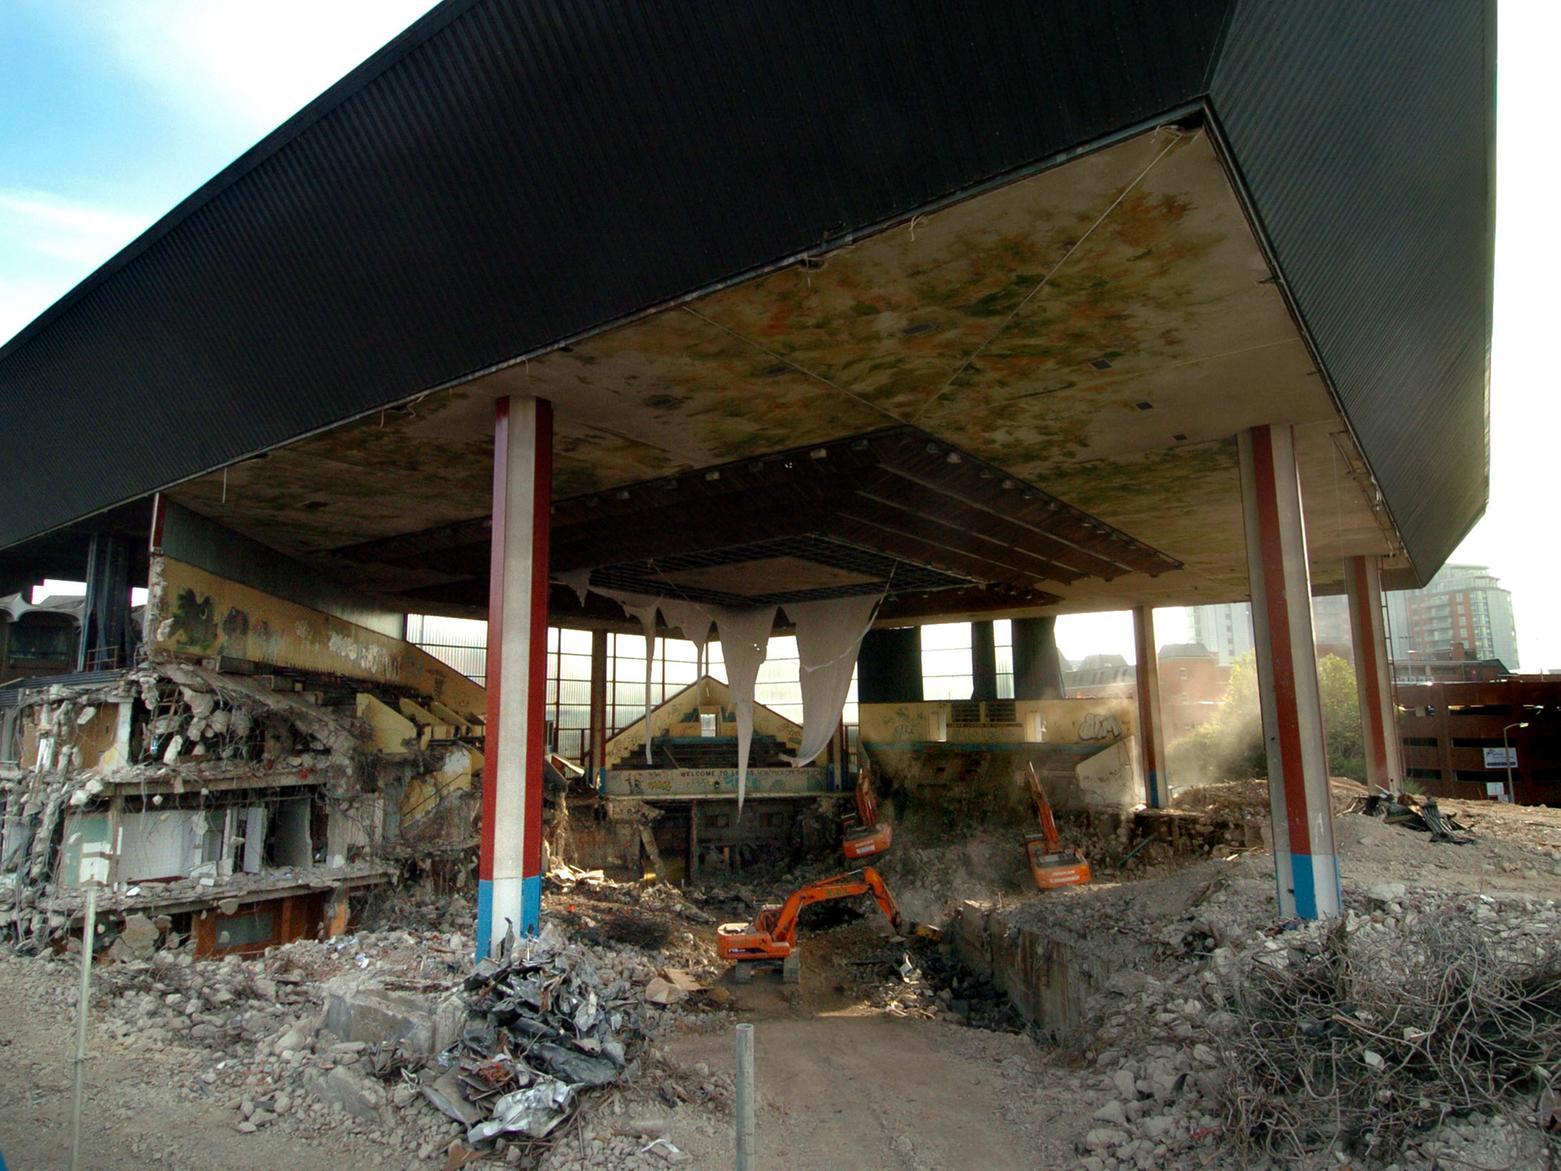 Do you remember when the International Pool was demolished?